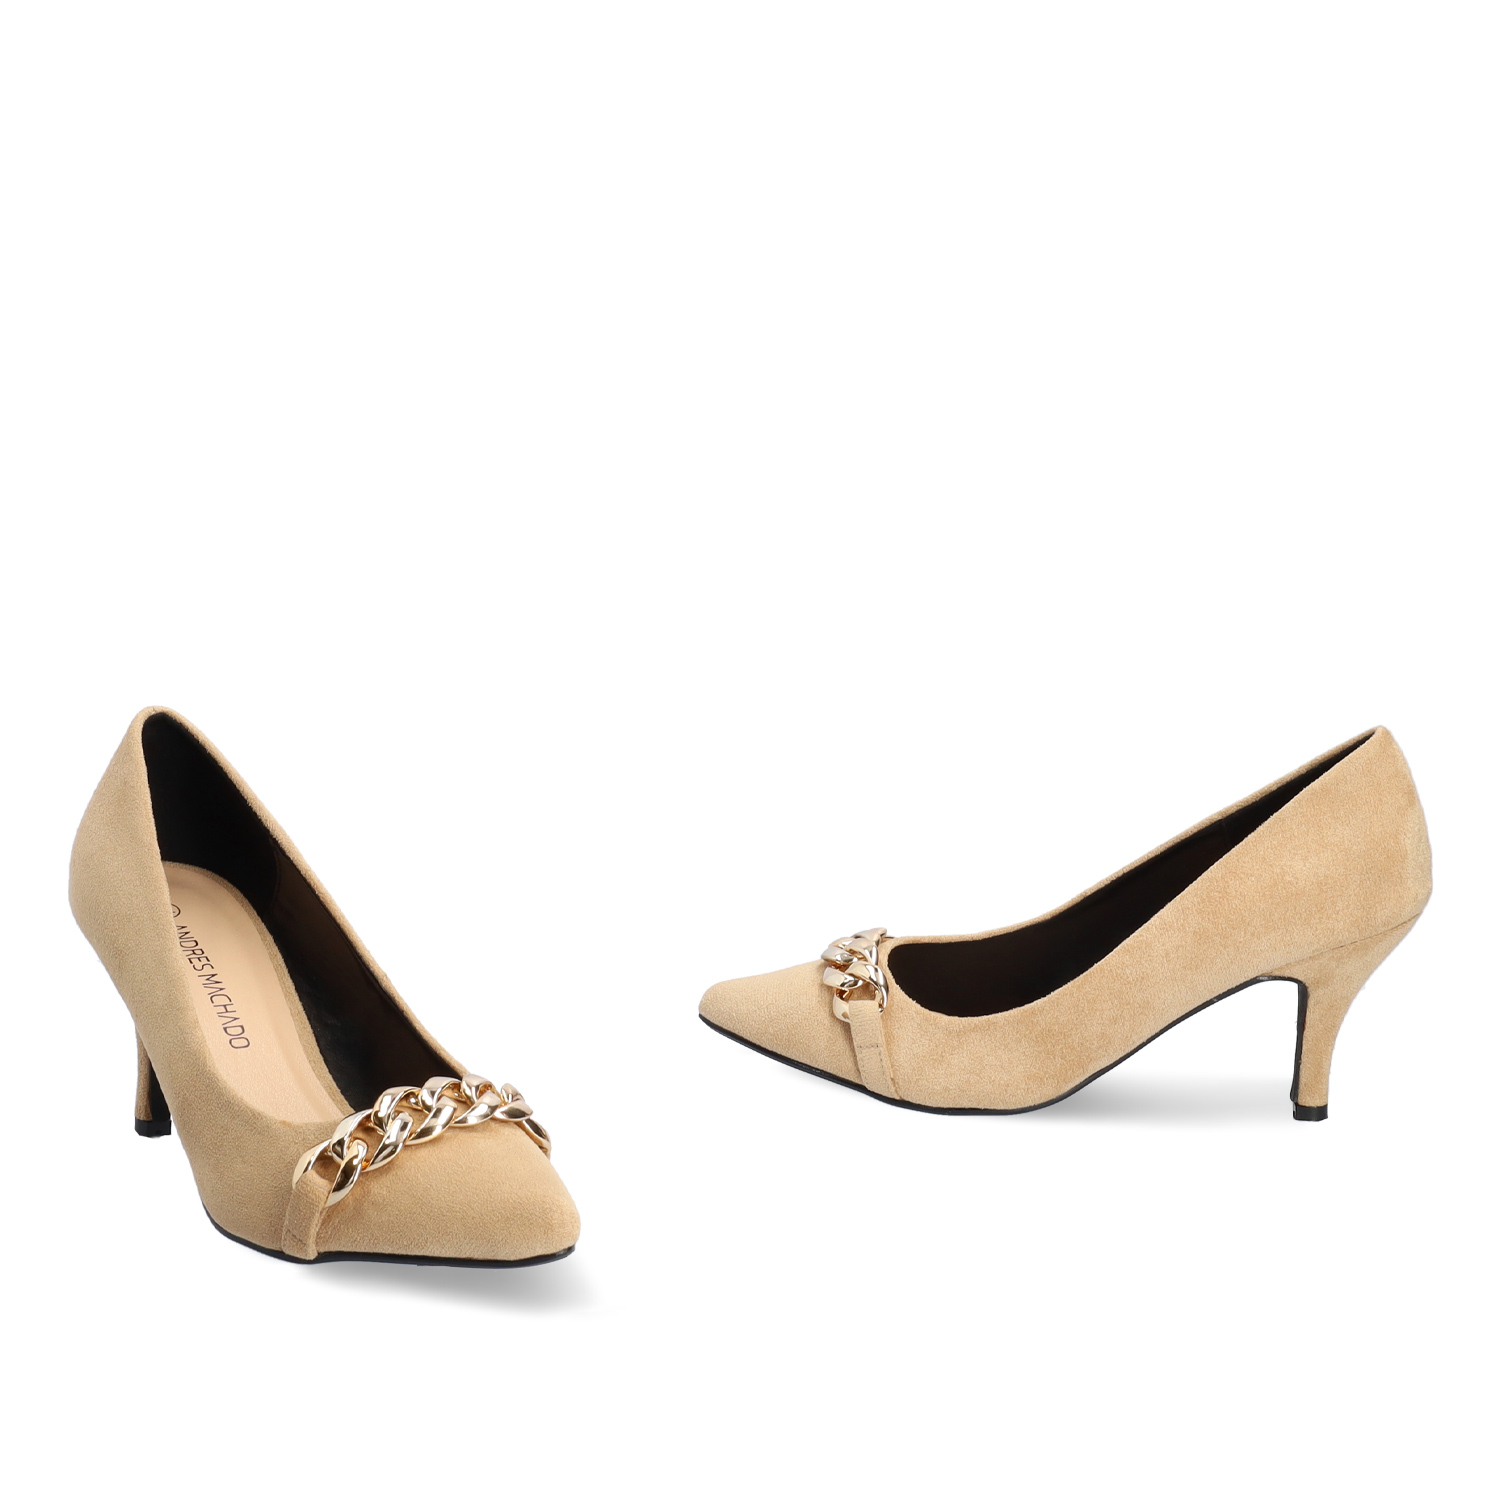 Heeled shoes in beige faux suede with chain link detail 